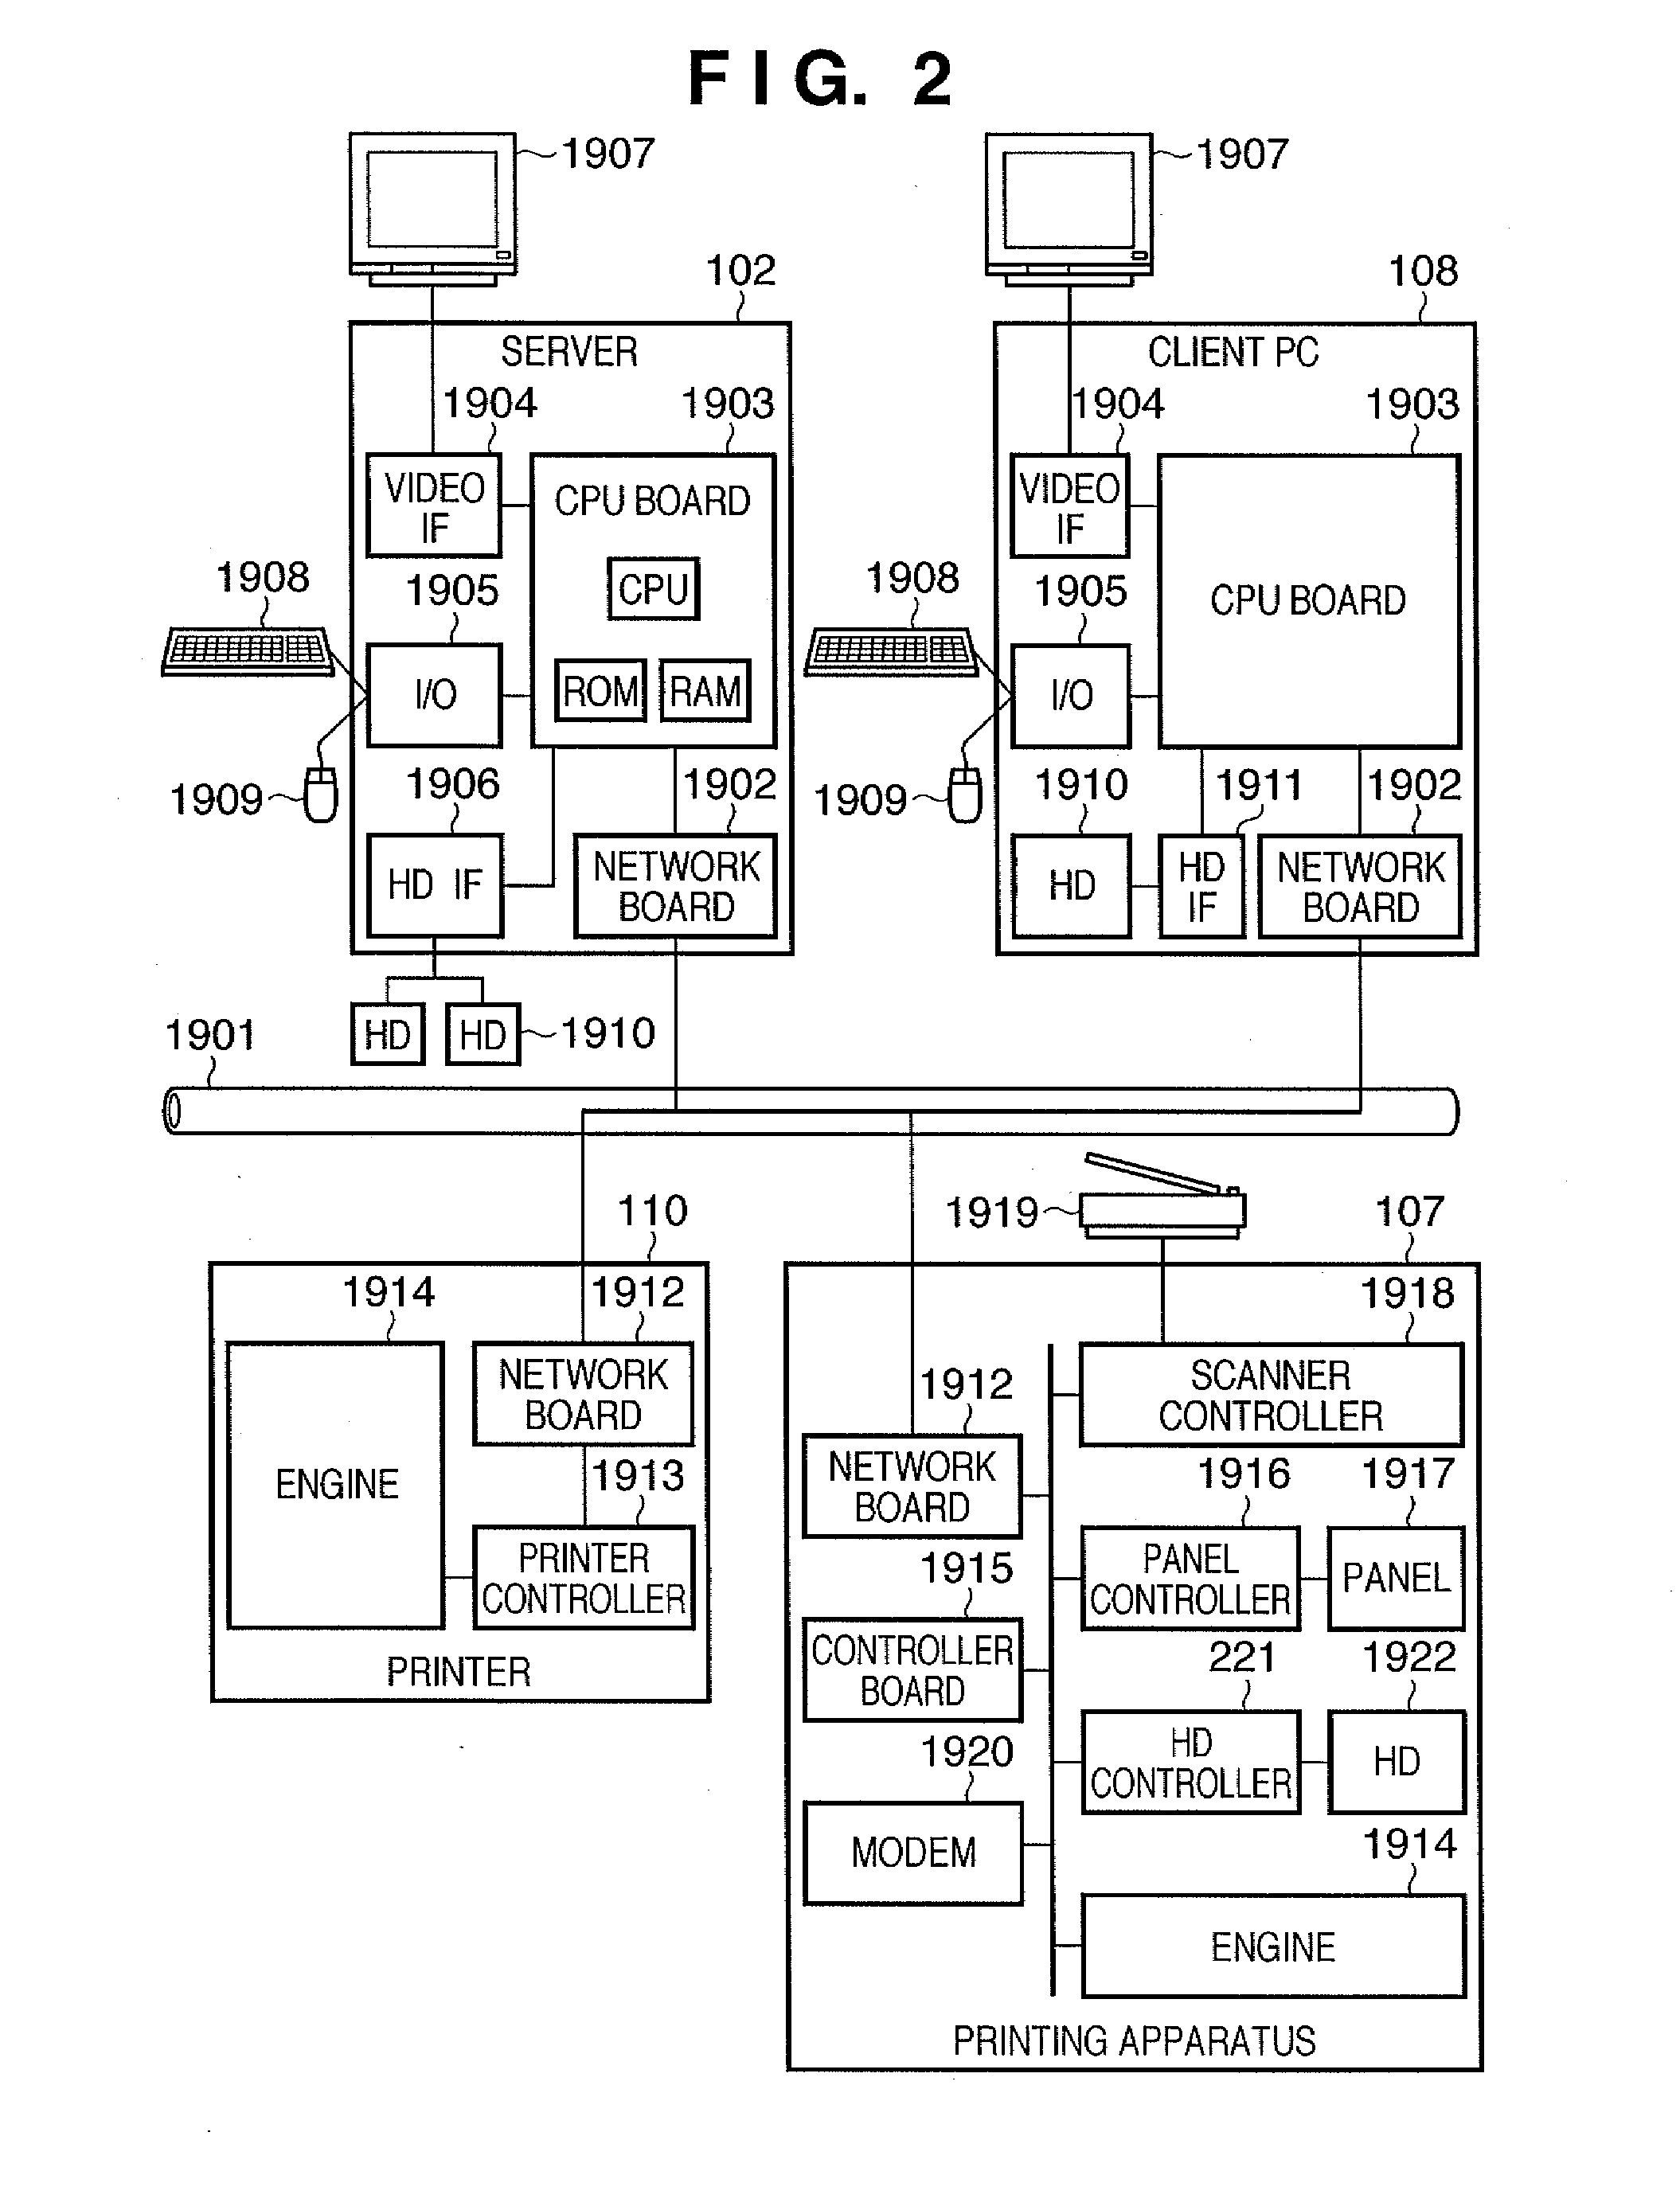 Job processing method and image processing system